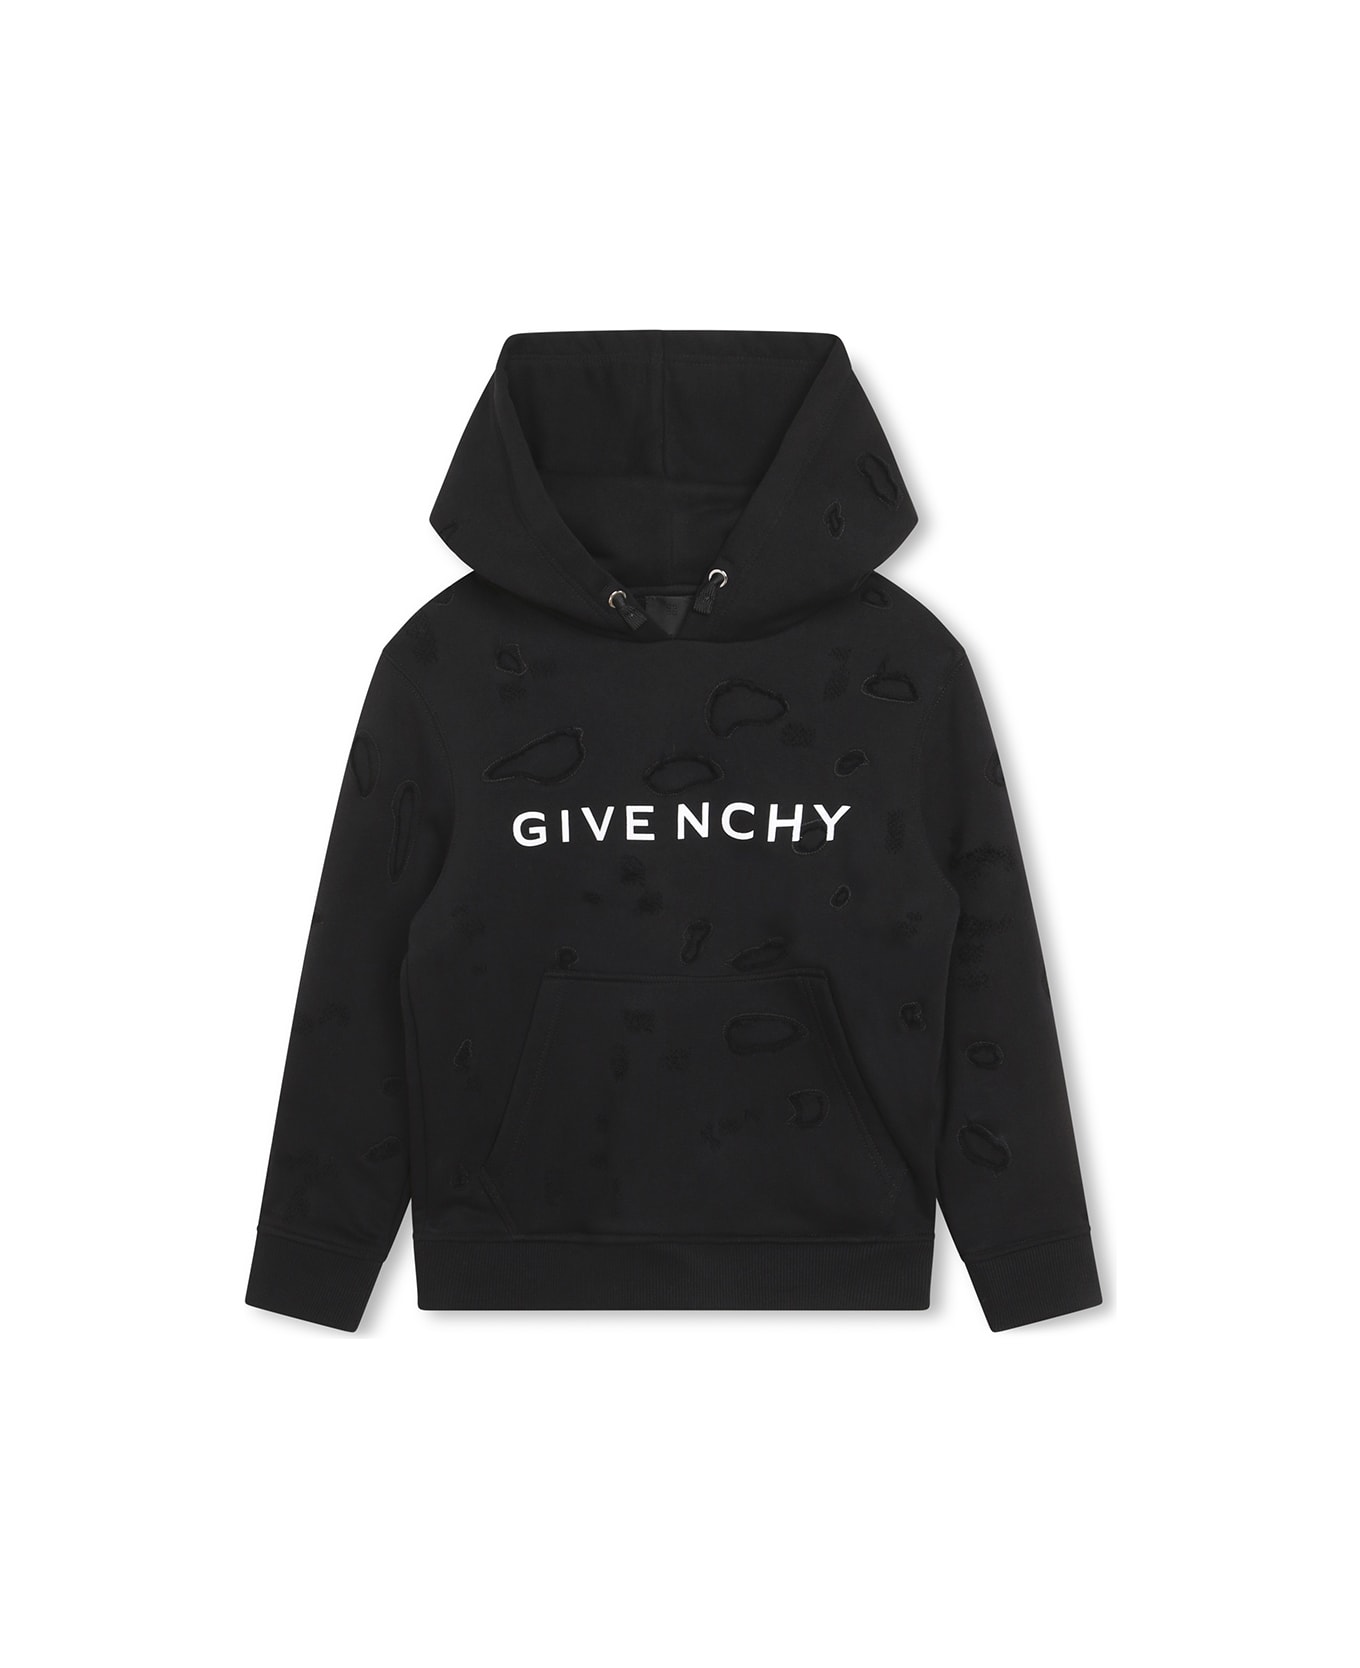 Givenchy Black Hoodie With Logo And Distressed Effect - Nero